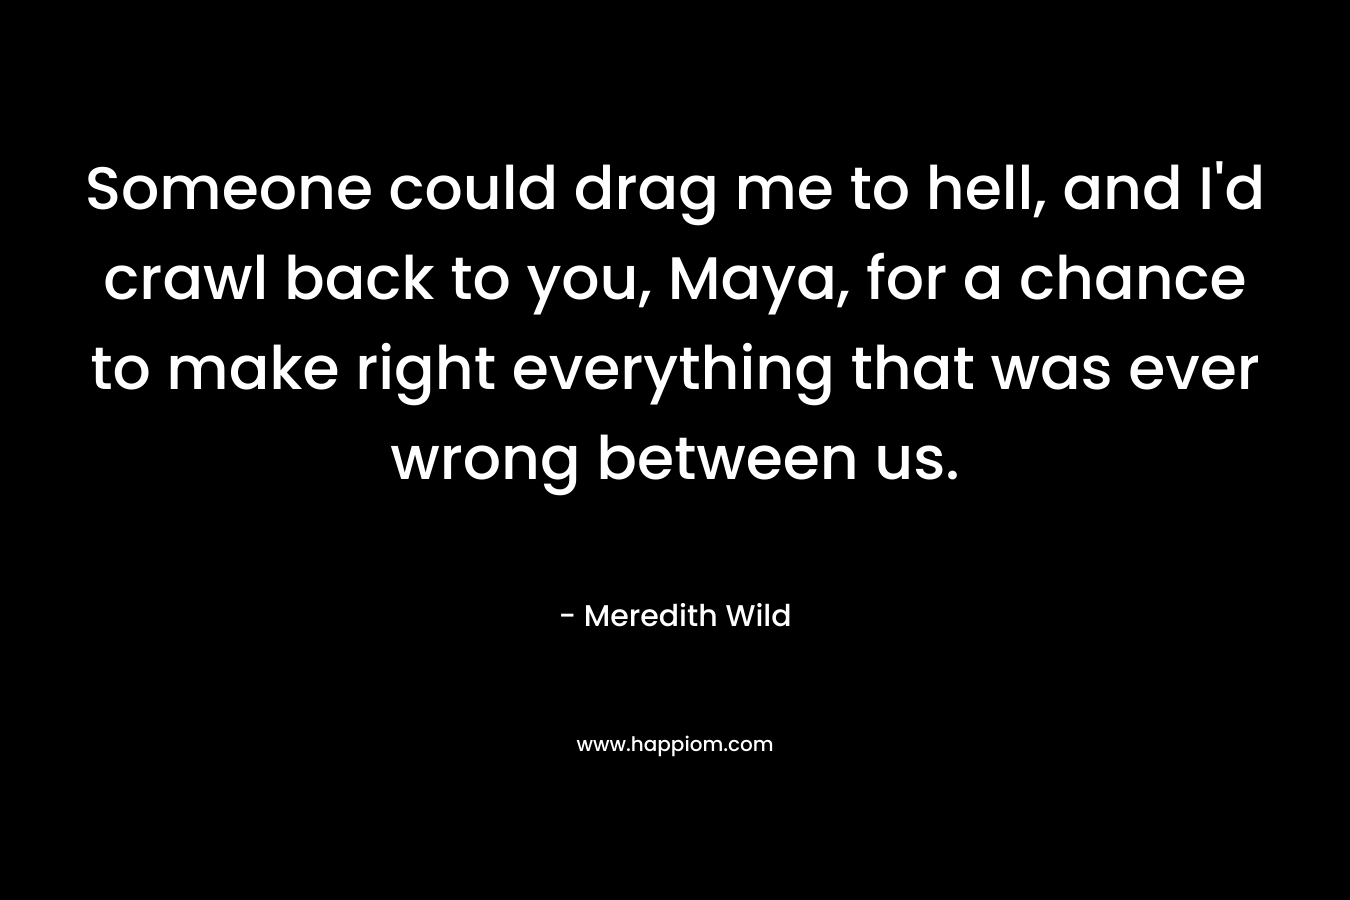 Someone could drag me to hell, and I’d crawl back to you, Maya, for a chance to make right everything that was ever wrong between us. – Meredith Wild